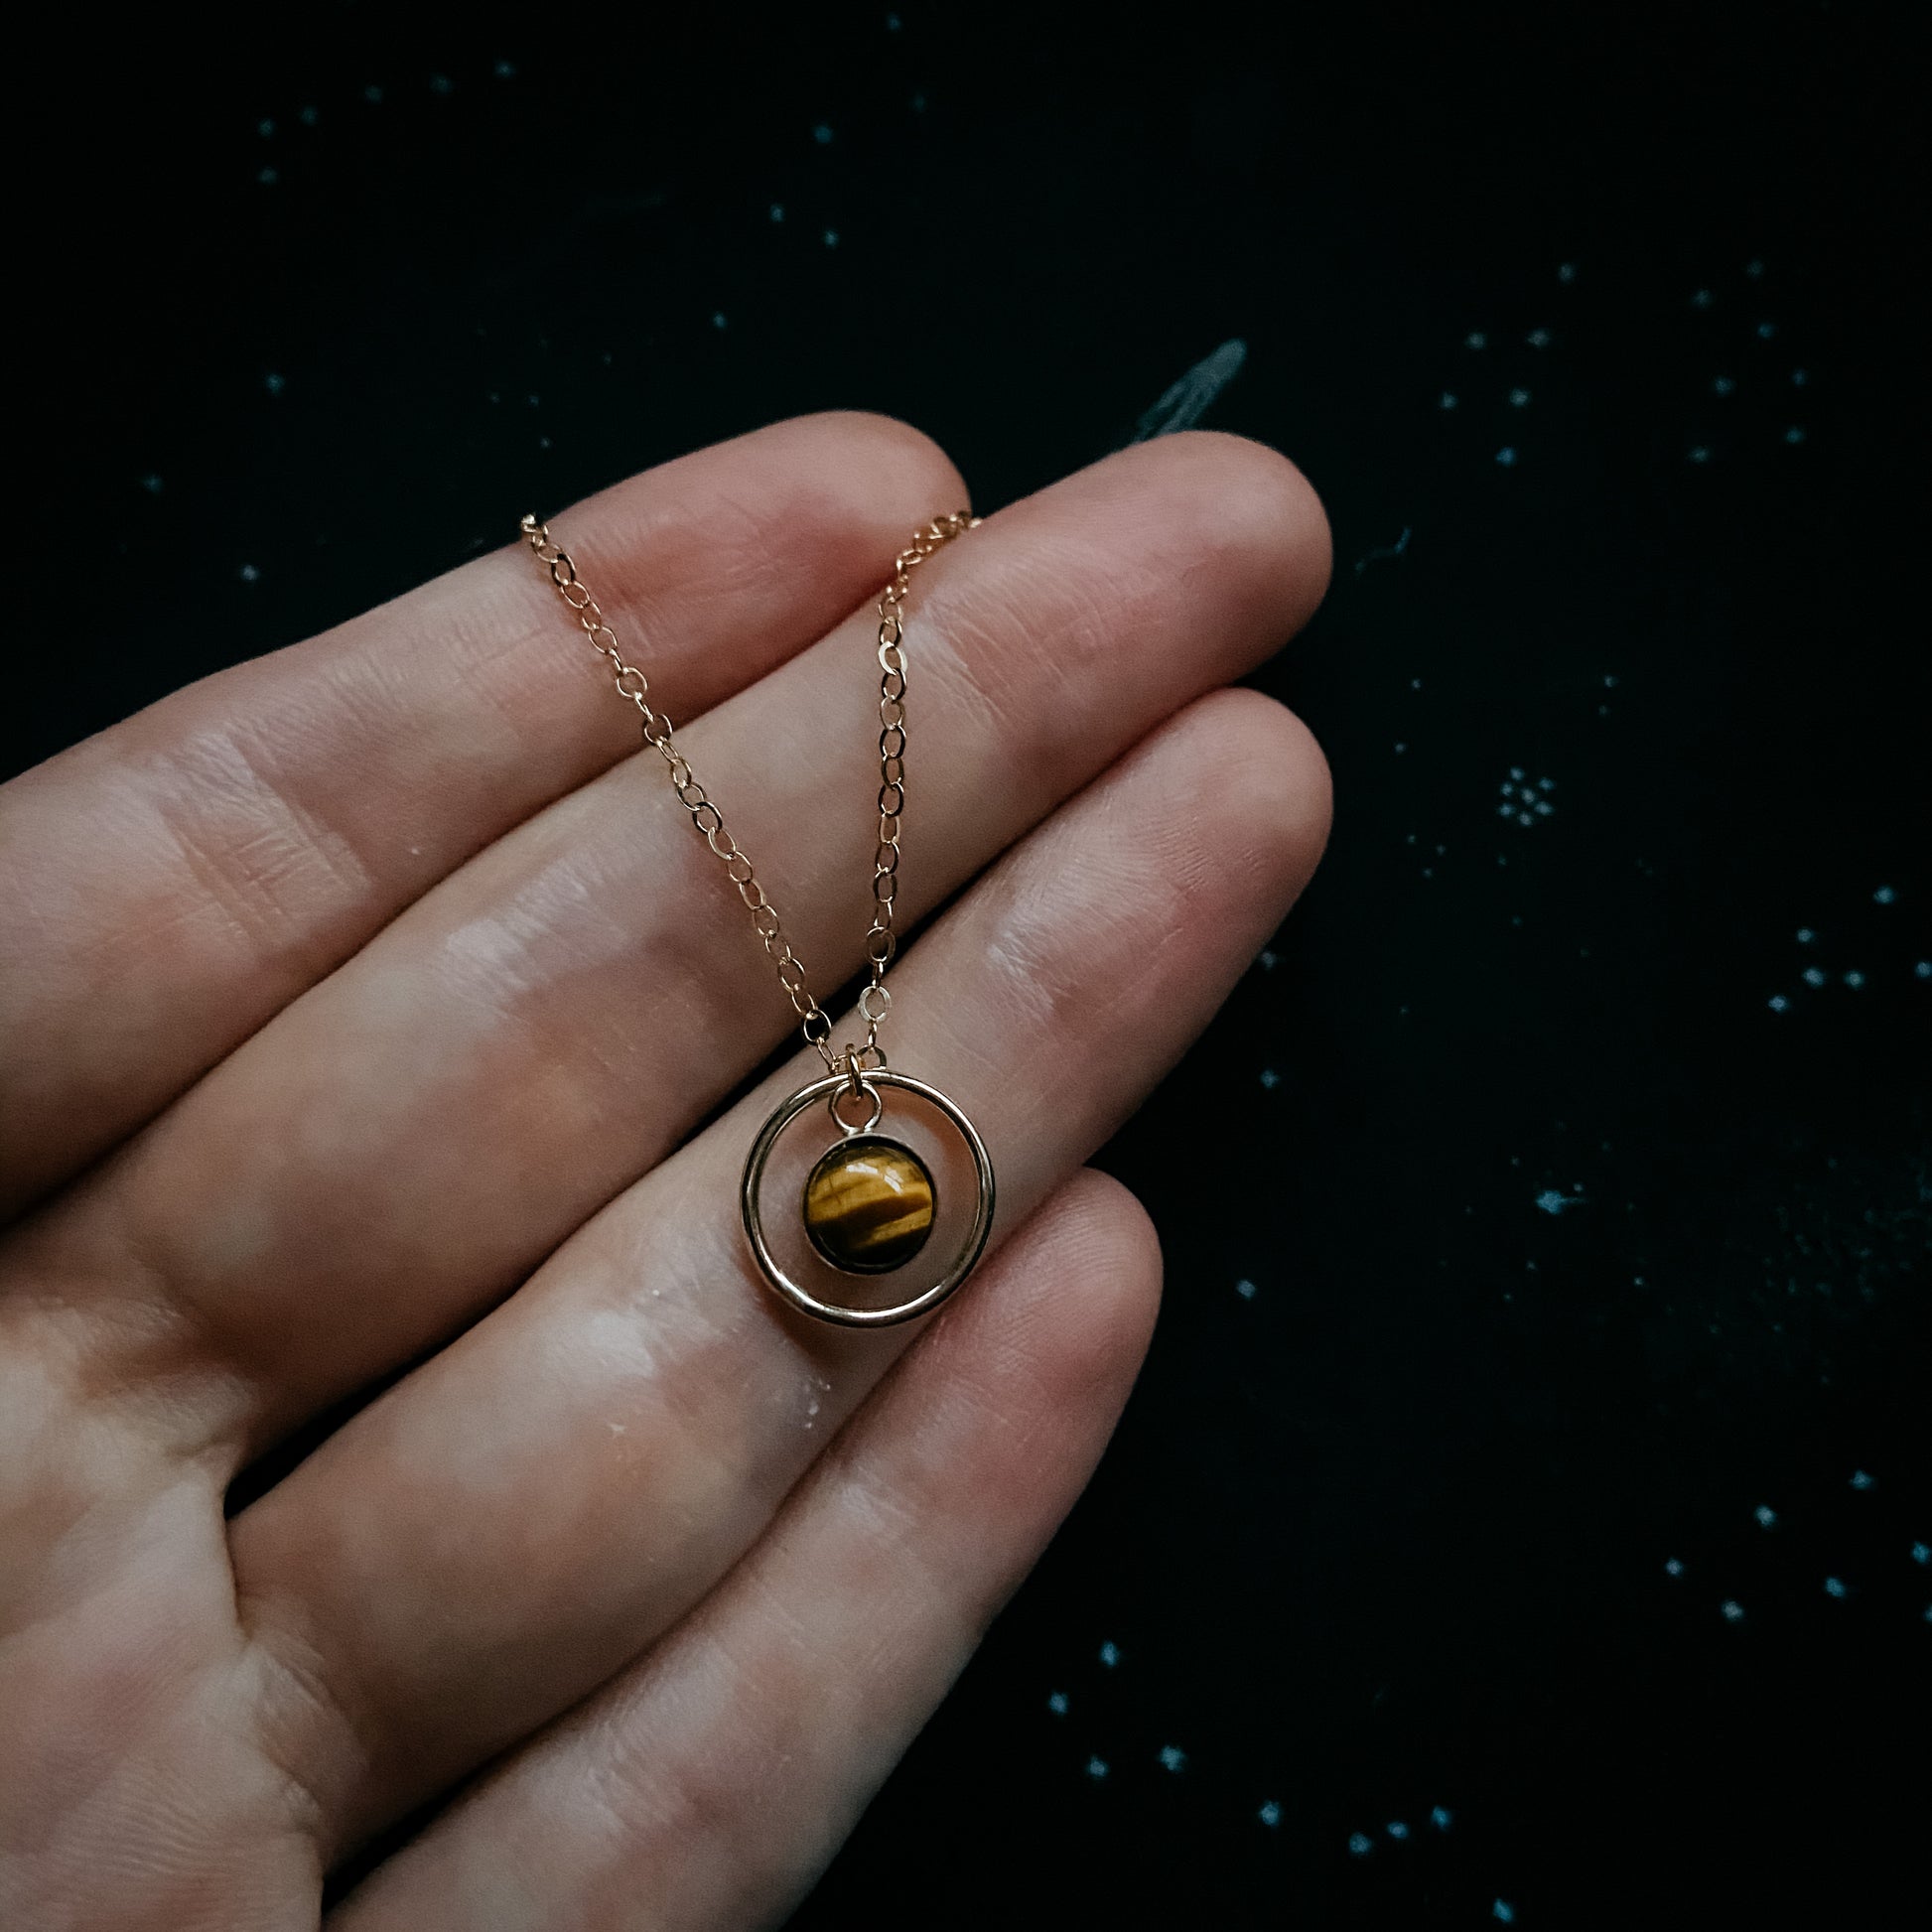 Rings of Saturn Mini Necklace Necklace Yugen Handmade   